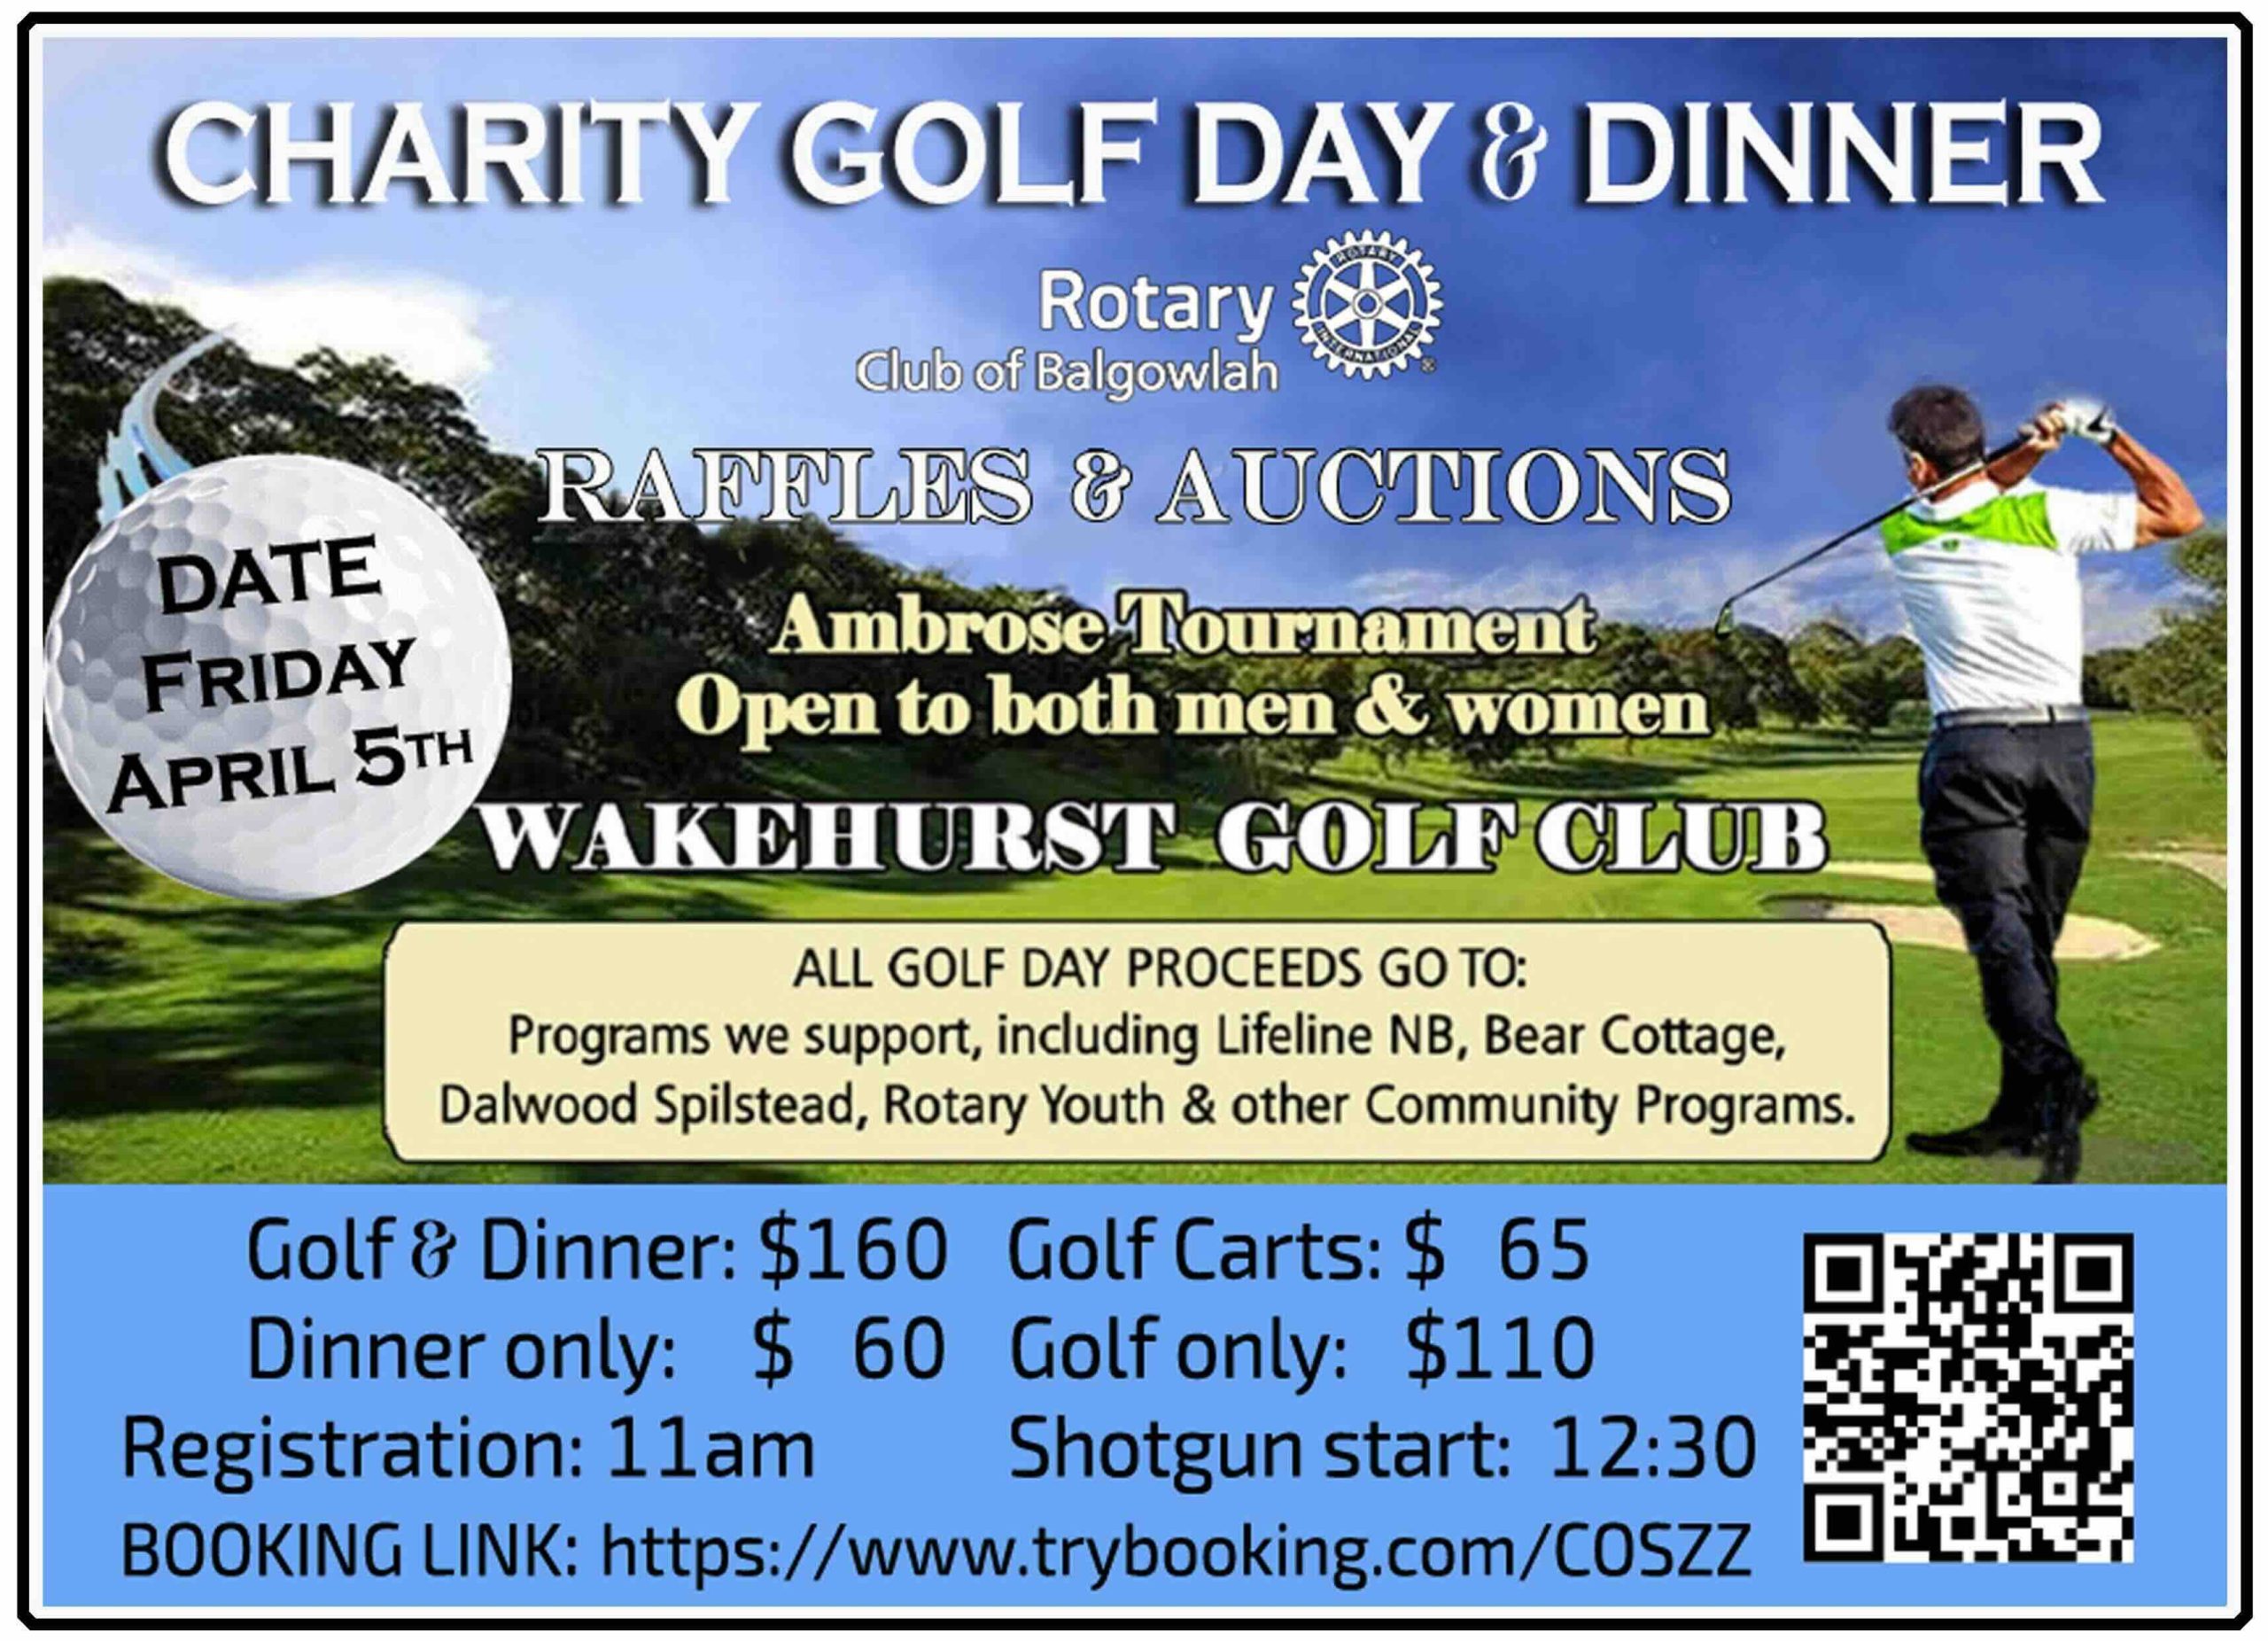 33 Charity Golf Day and Dinner at Wakehurst Golf Club